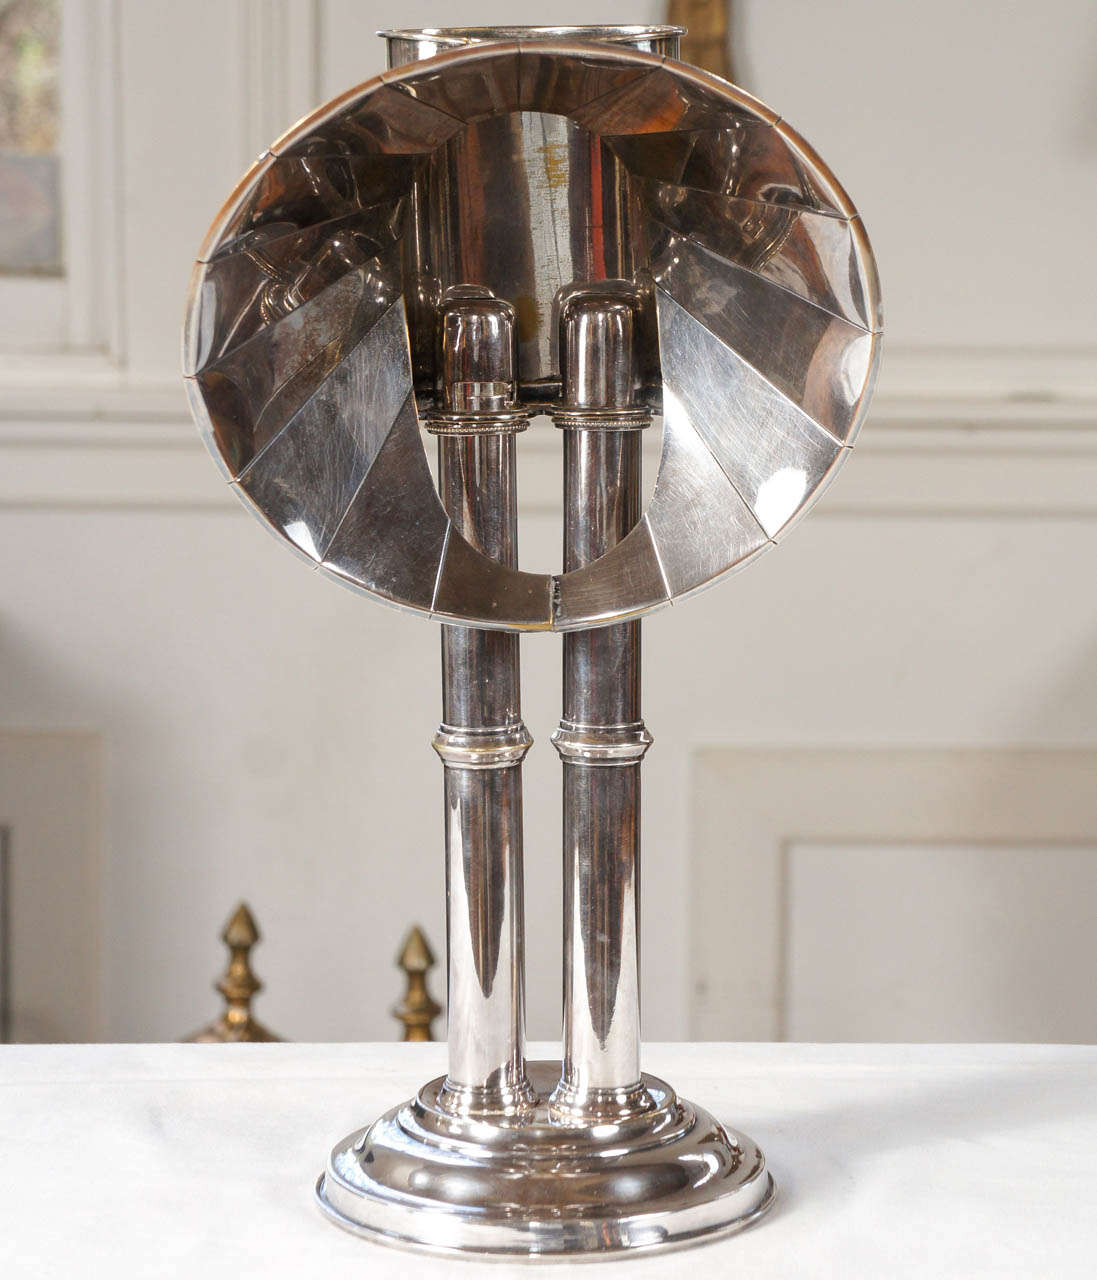 19th century Yale Student's Lamp. Spring-loaded for candles. Silvered finish.